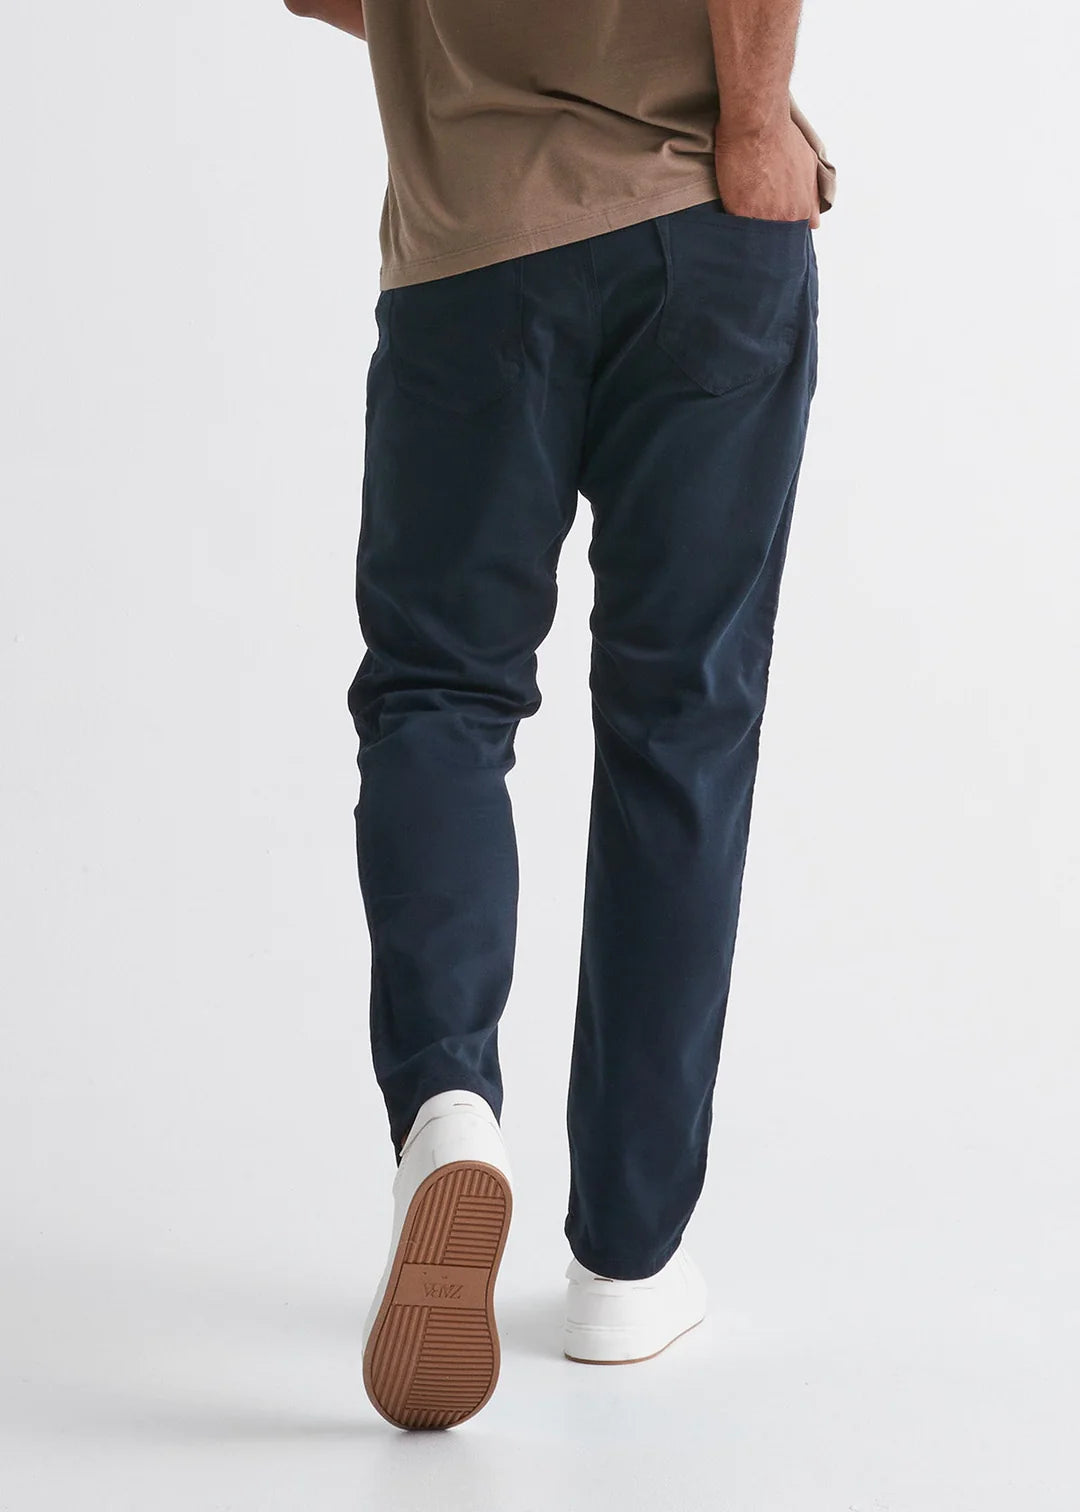 Back view of man wearing the No Sweat Relaxed Taper pant by DUER in color Navy